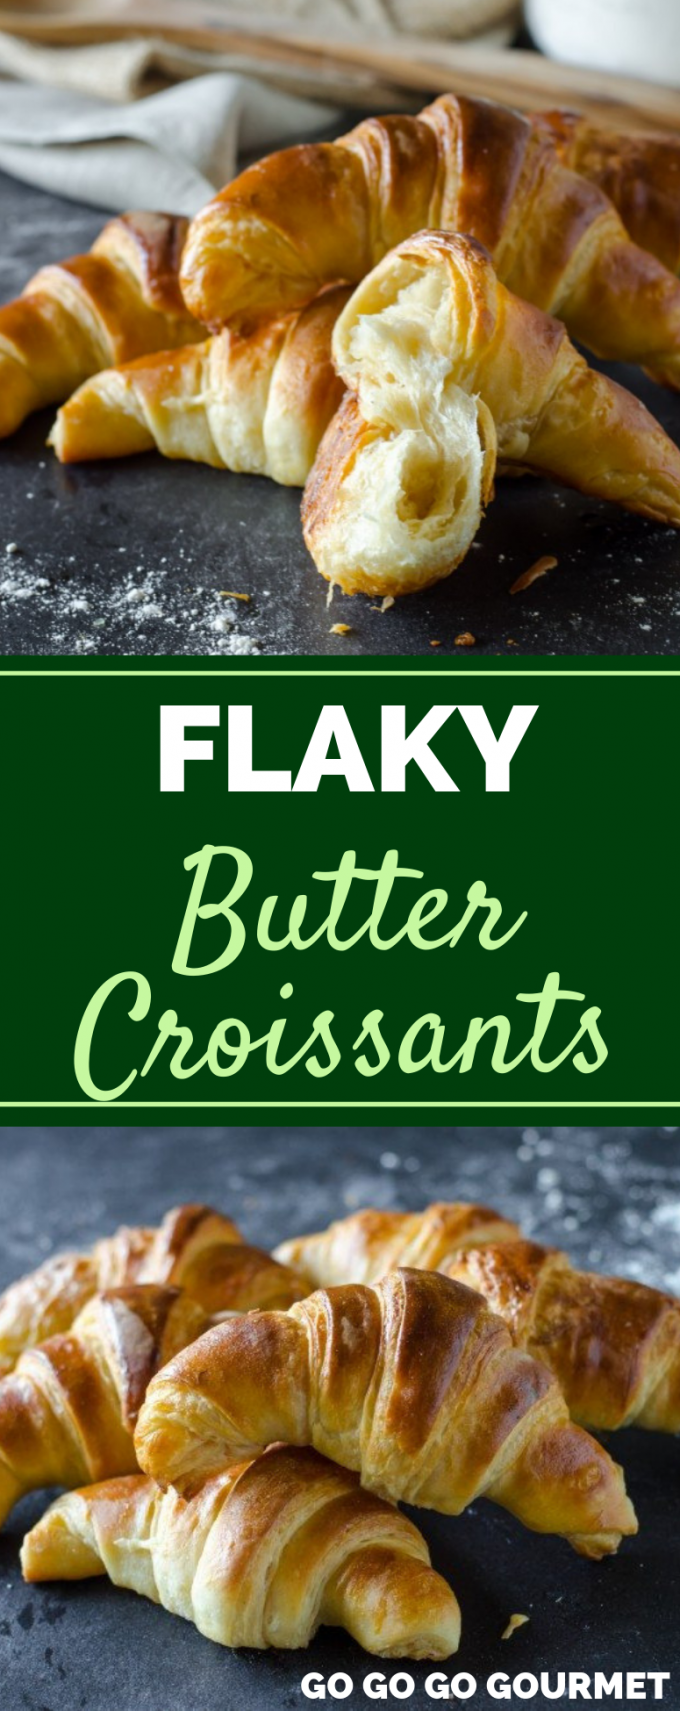 If you're looking for breakfast ideas, I've got you covered with these Flaky Butter Croissants! So much better than Pillsbury, this recipe is reminiscent of those authentic French bakeries! #gogogogourmet #flakybuttercroissants #croissantrecipe #homemadecroissants via @gogogogourmet